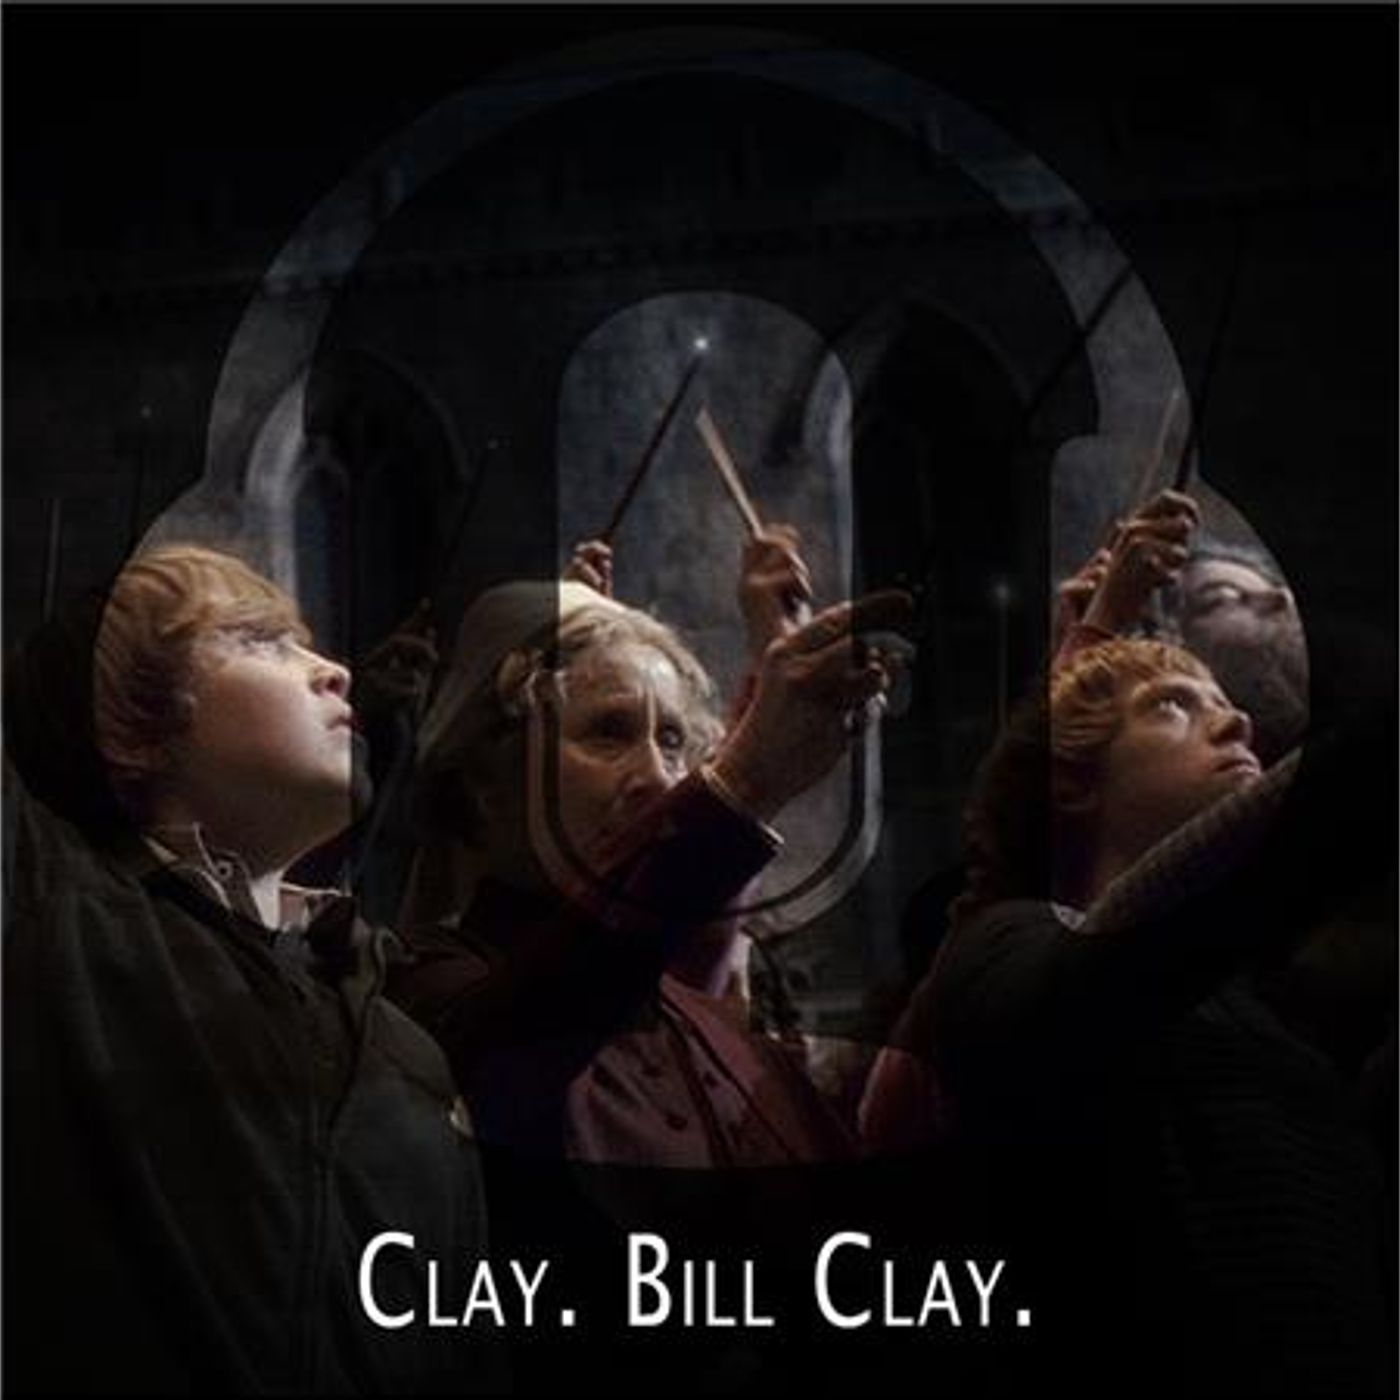 Session 40 - Clay. Bill Clay.